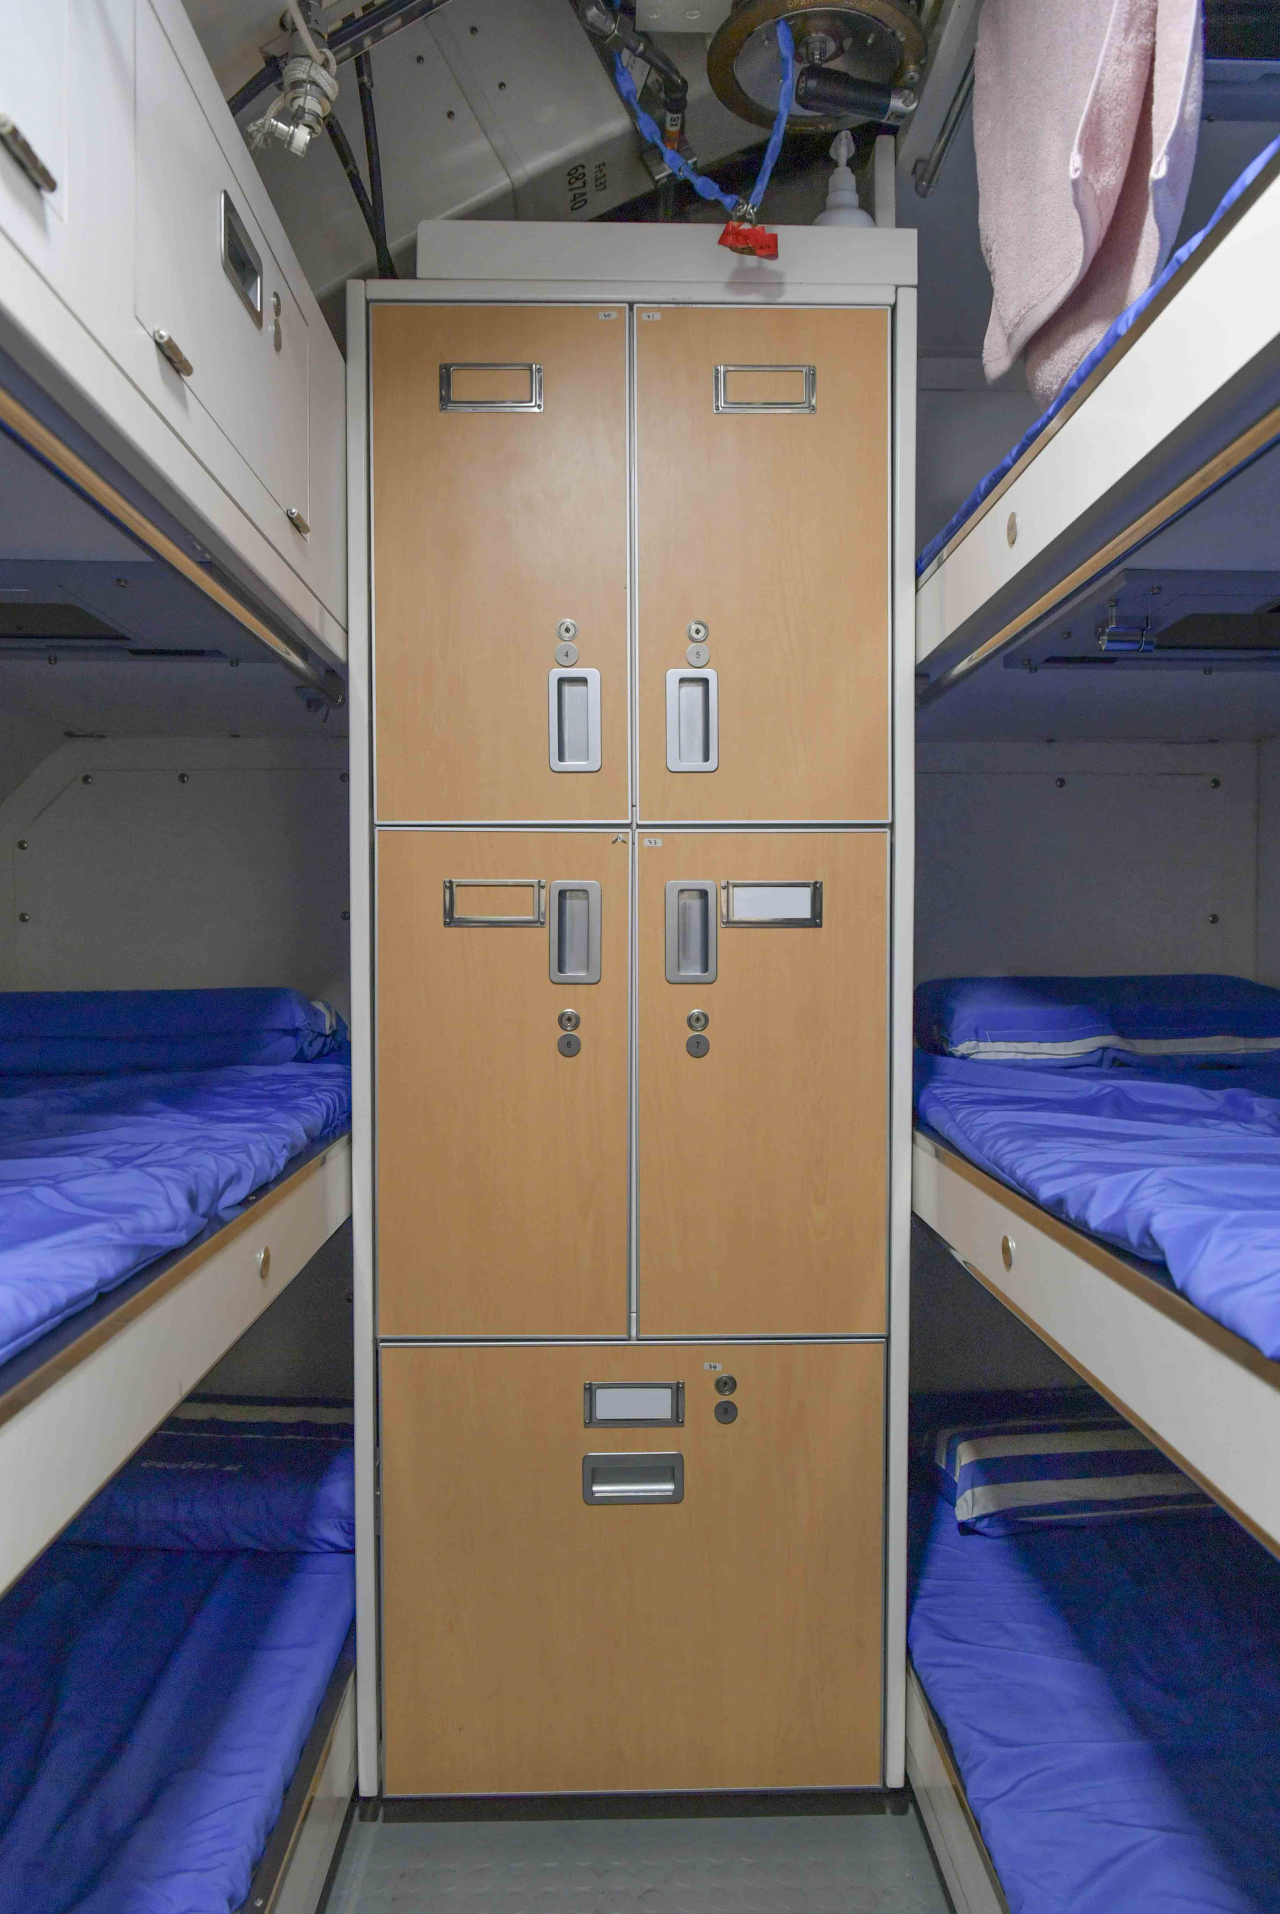 A total of 50 beds, each measuring 190 centimeters long, are arranged aboard the Dosan Ahn Changho submarine. Most of them are three-level bunk beds, which appear quite uncomfortable to sleep in, especially the beds on the very bottom (Republic of Korea Navy)